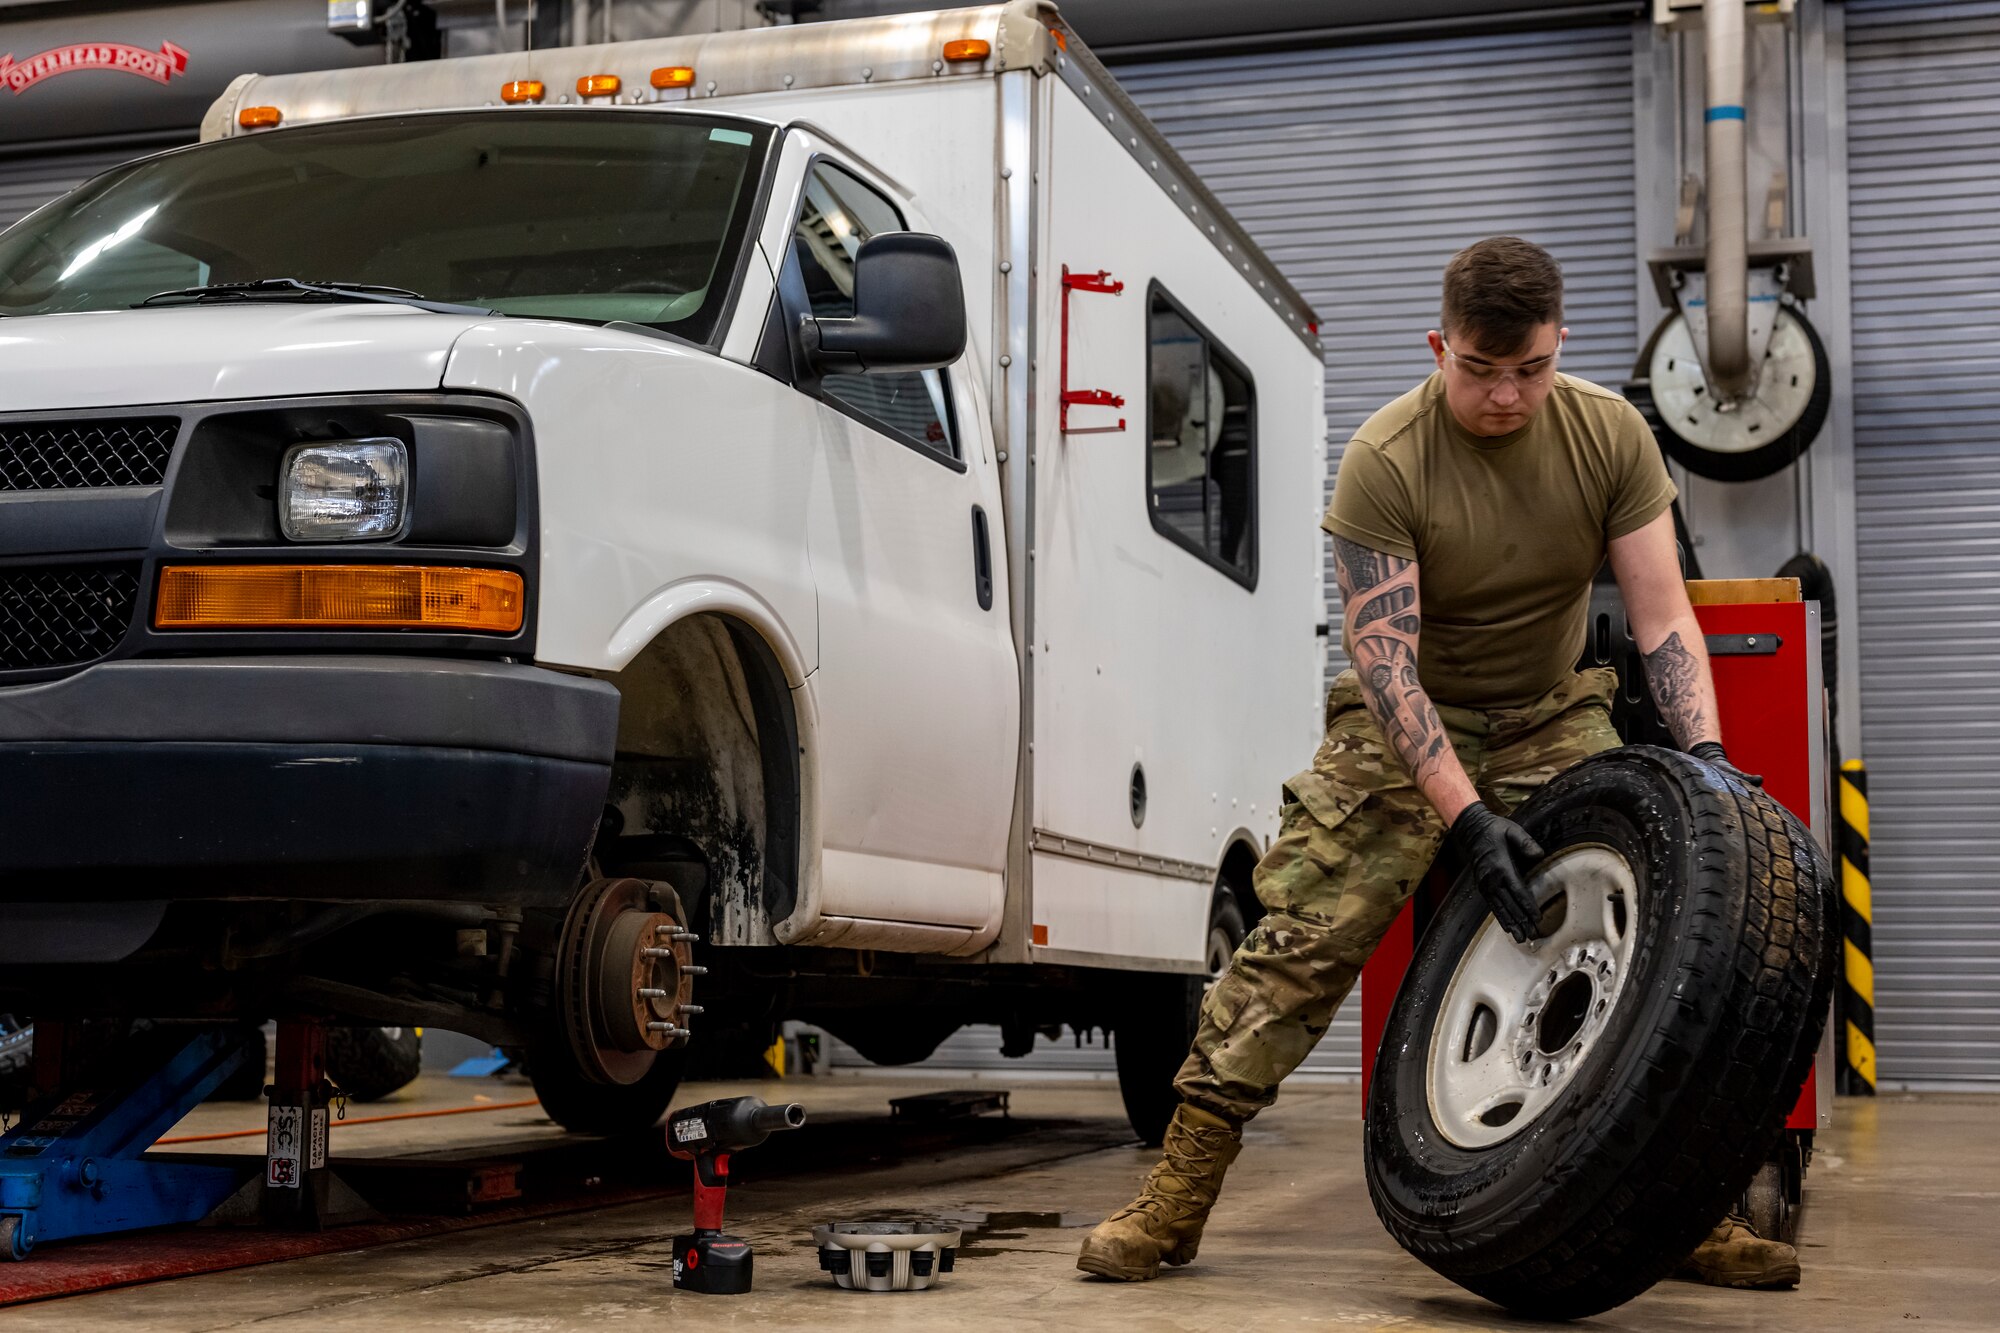 Airman removing tire from a truck.